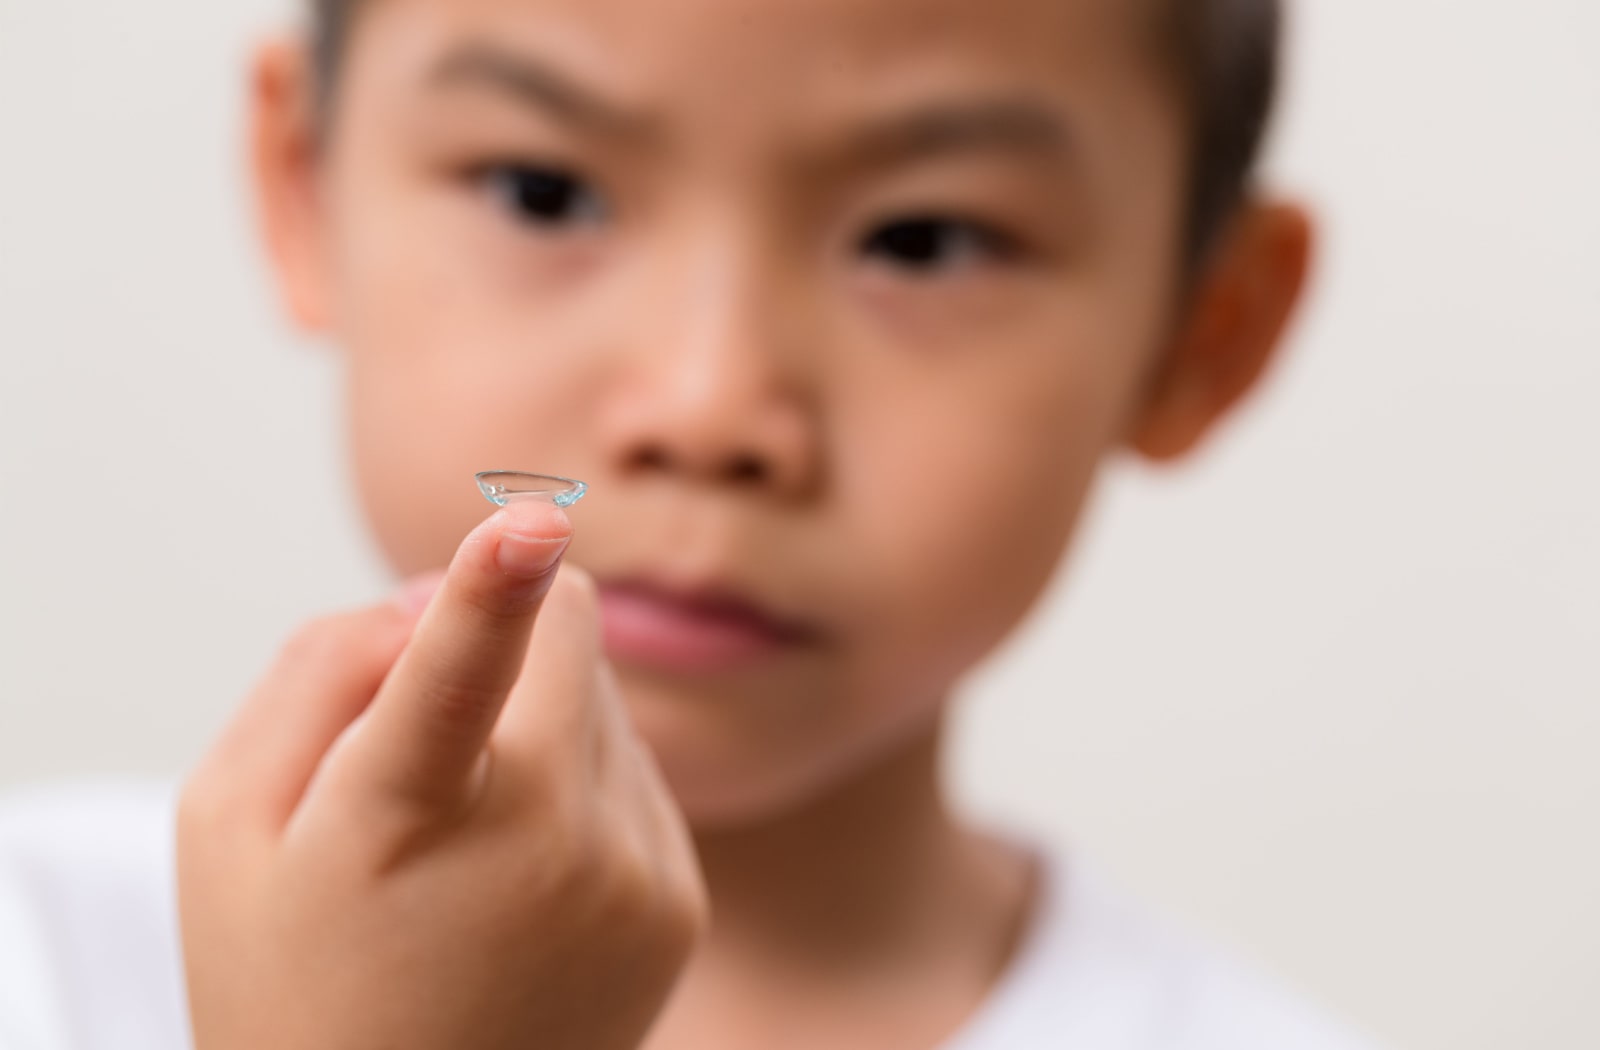 A young boy holds out a contact lens on his right index finger